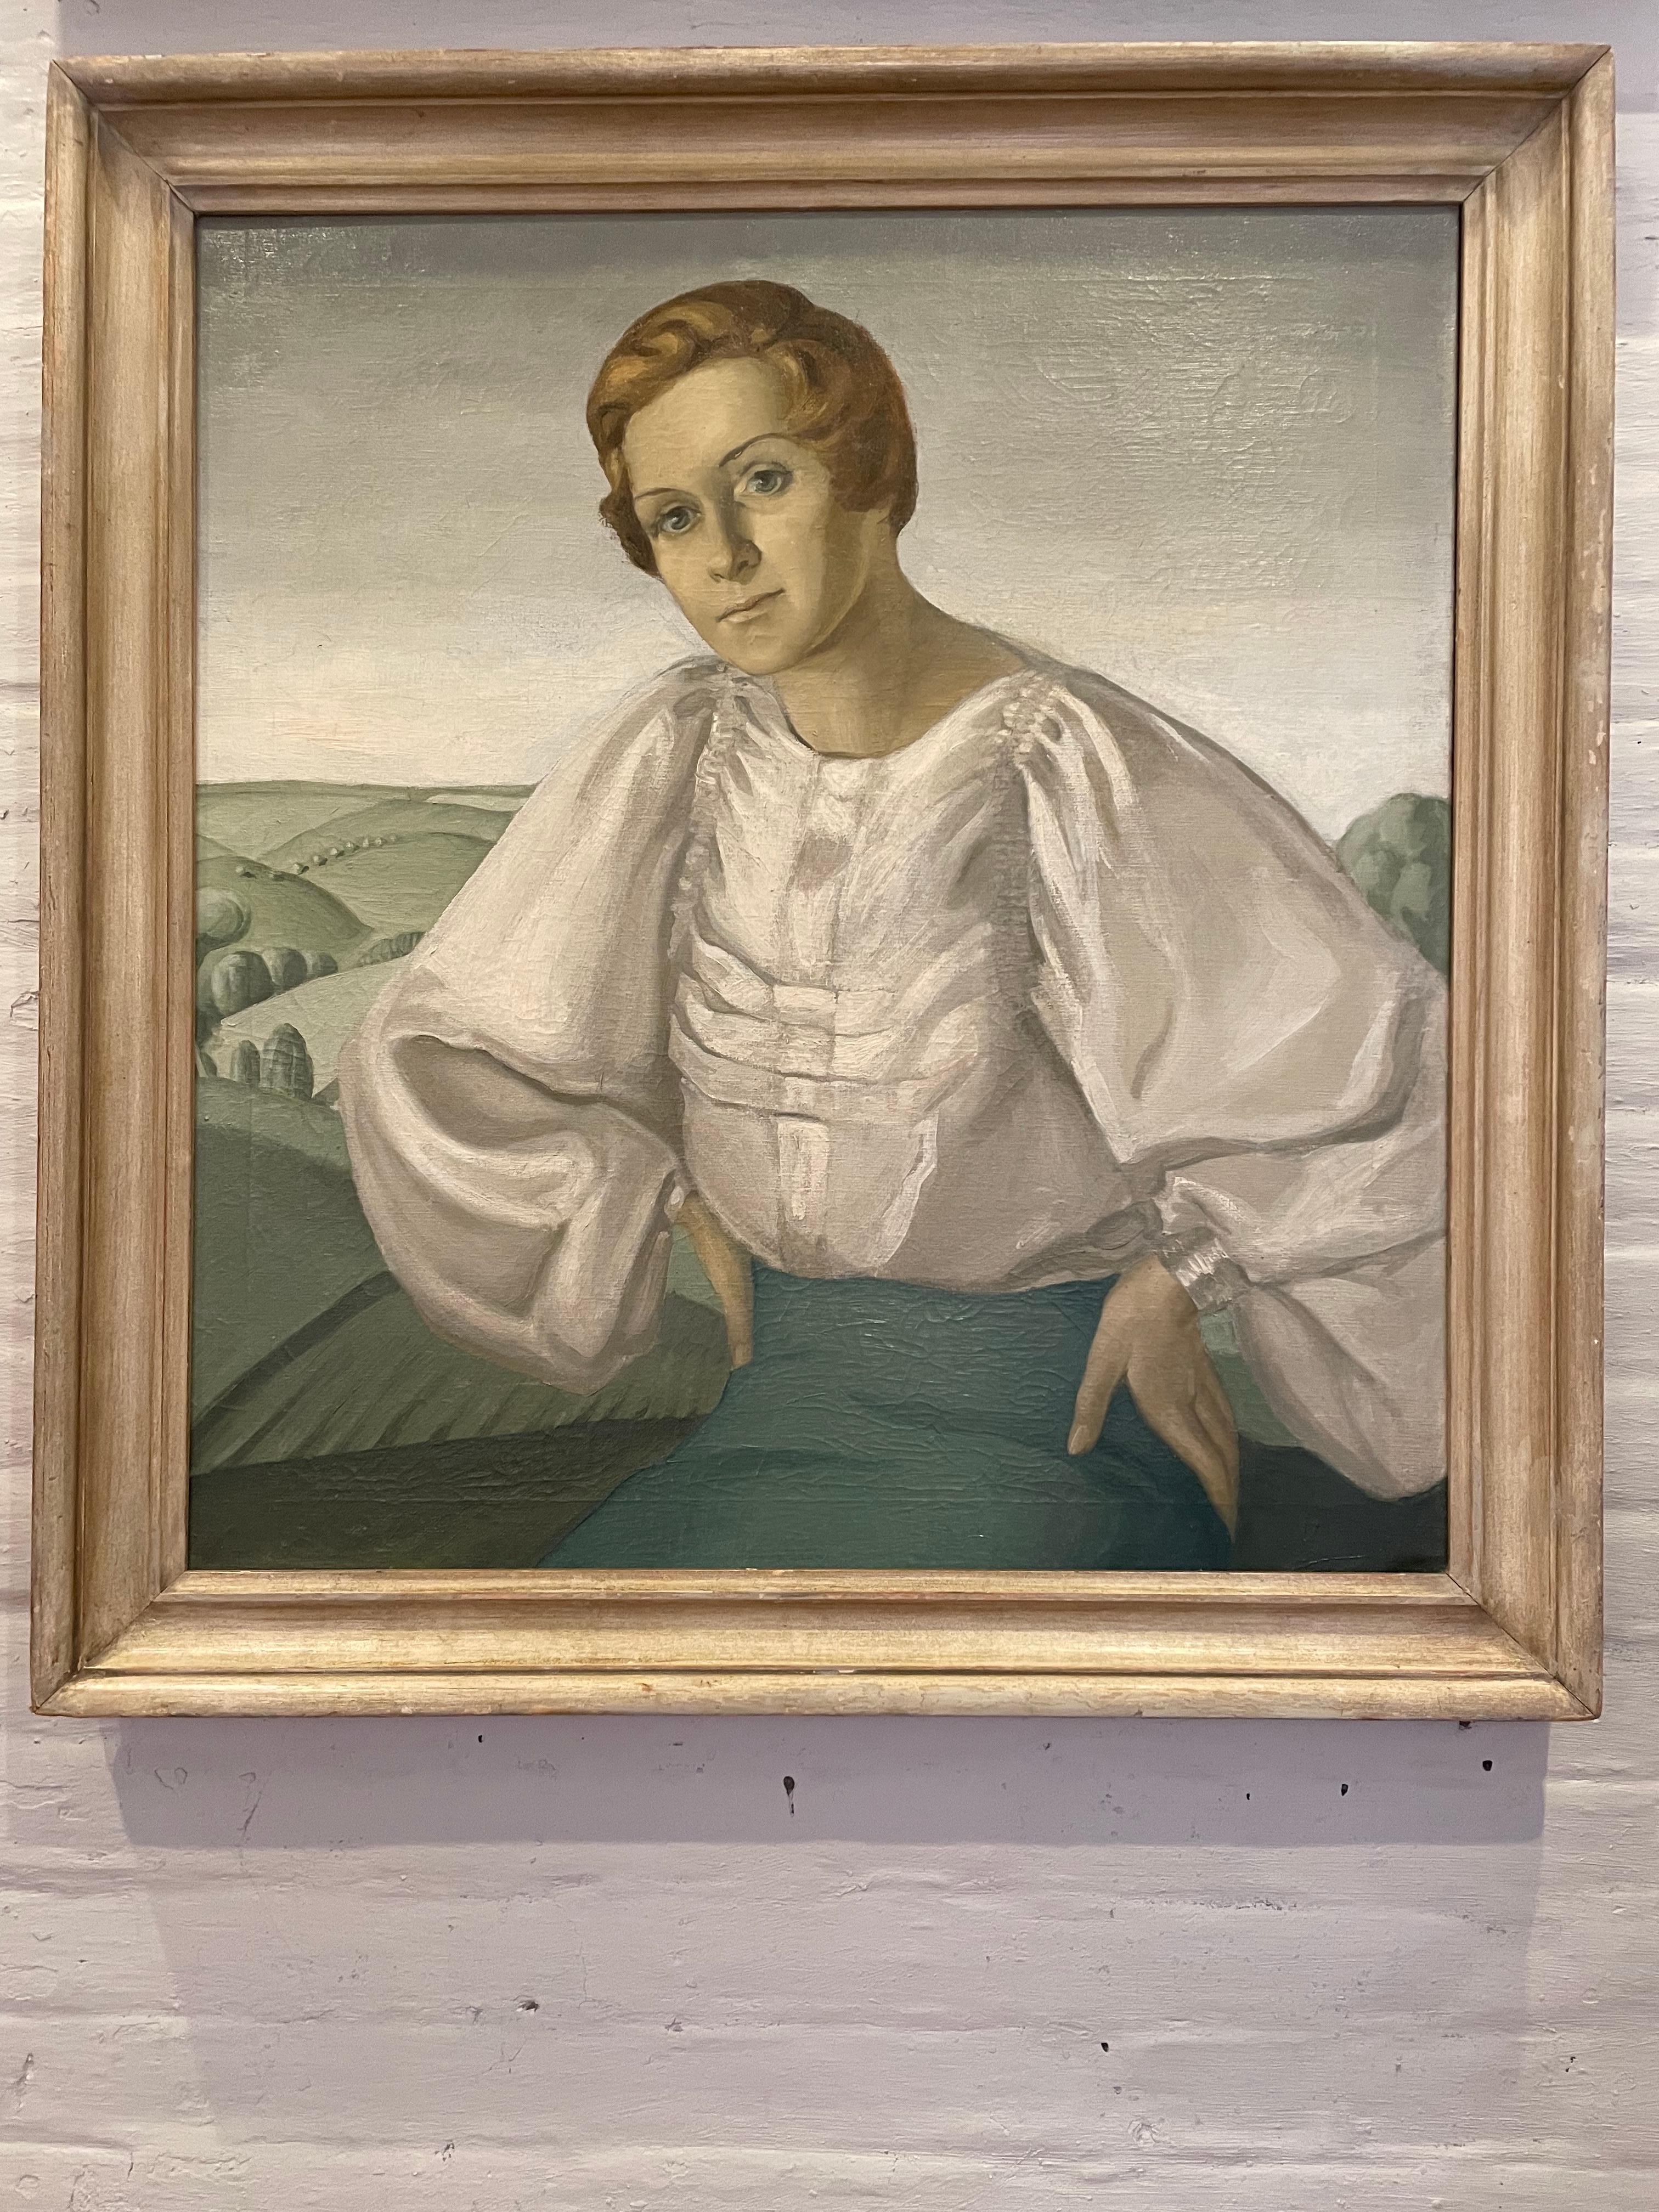 Unknown Portrait Painting - American Midwest Regional Portrait Oil Painting, Circle of Grant Wood, ca 1940’s